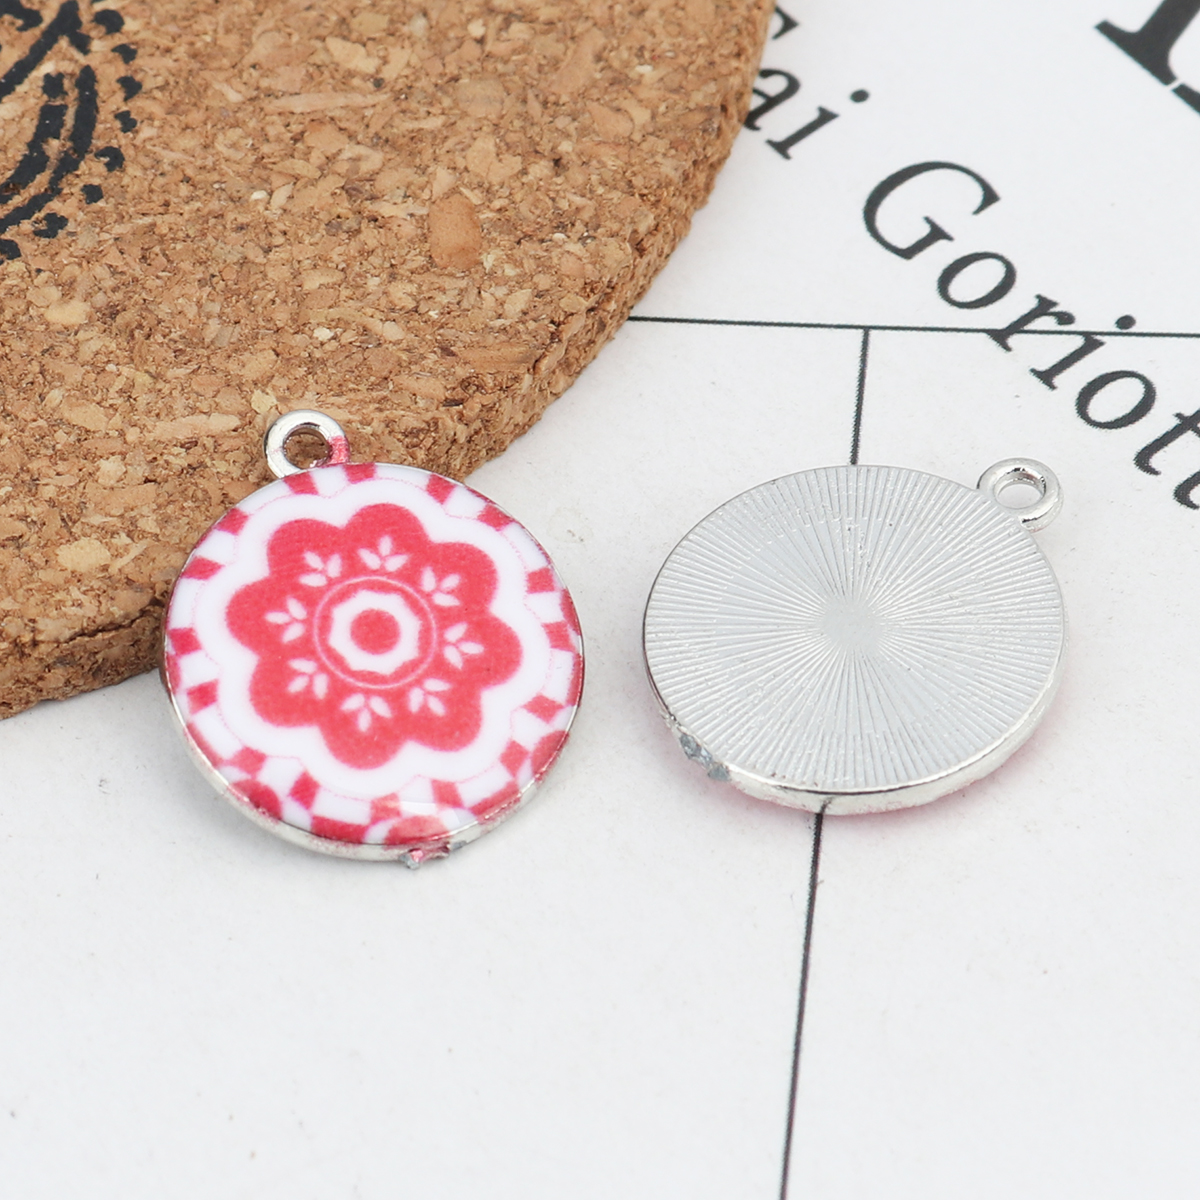 Picture of Zinc Based Alloy Charms Round Silver Tone White & Red Flower Enamel 21mm x 18mm, 10 PCs